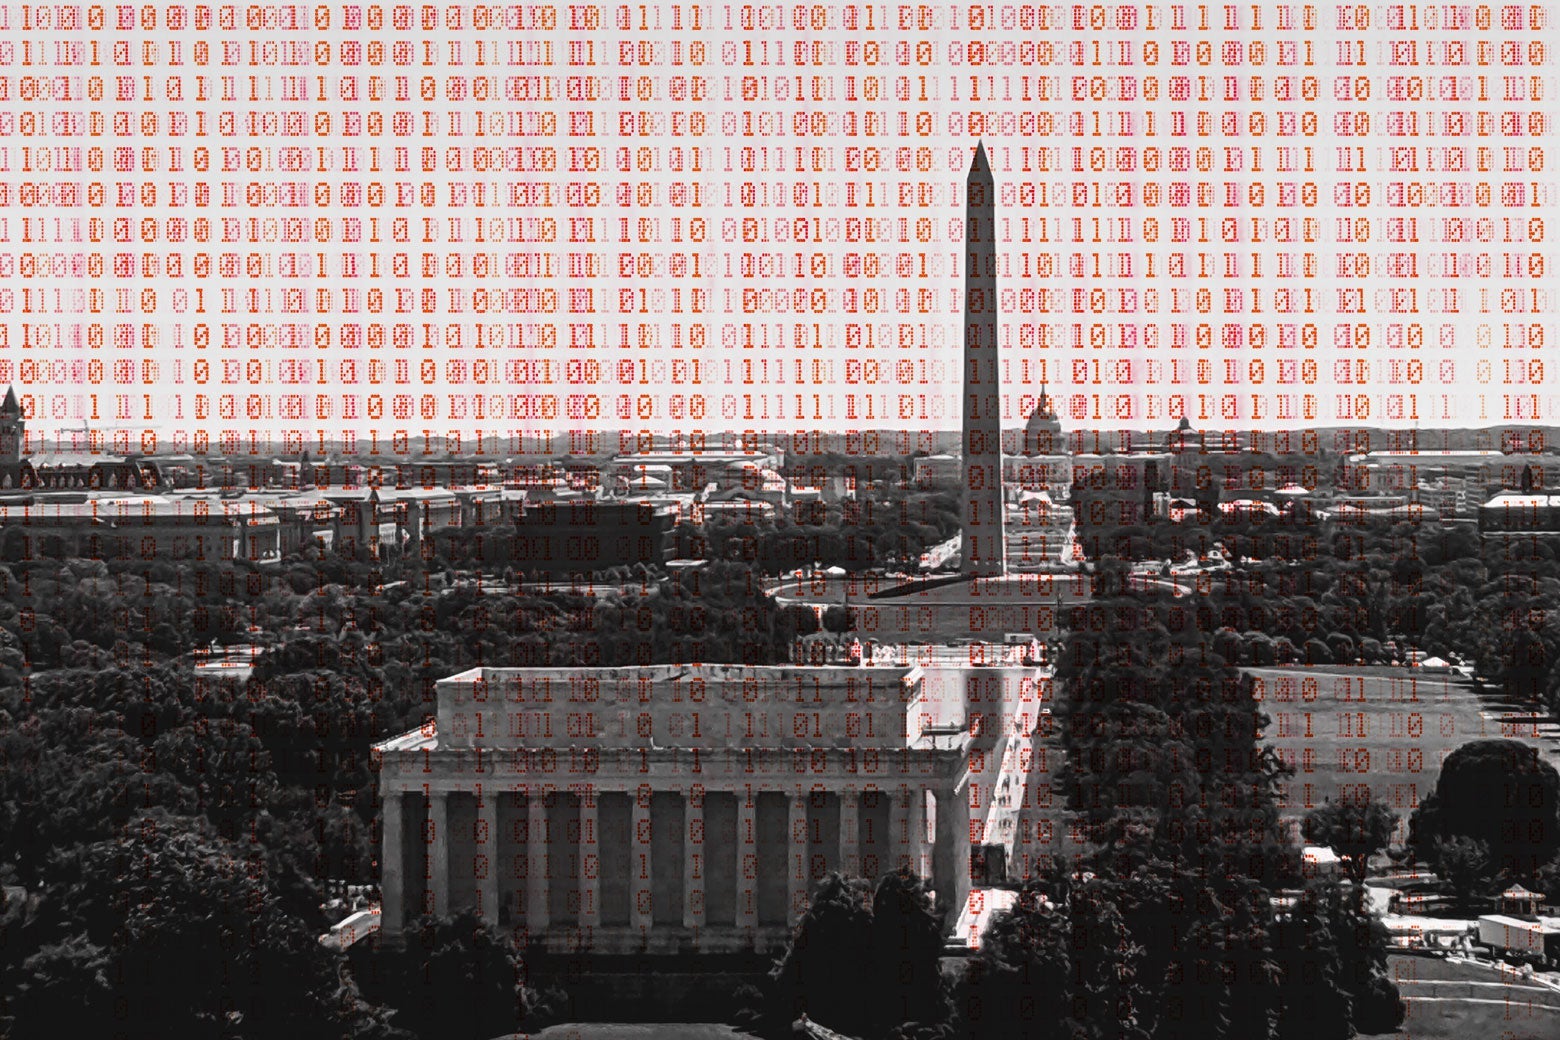 The National Mall overlaid with computer code.